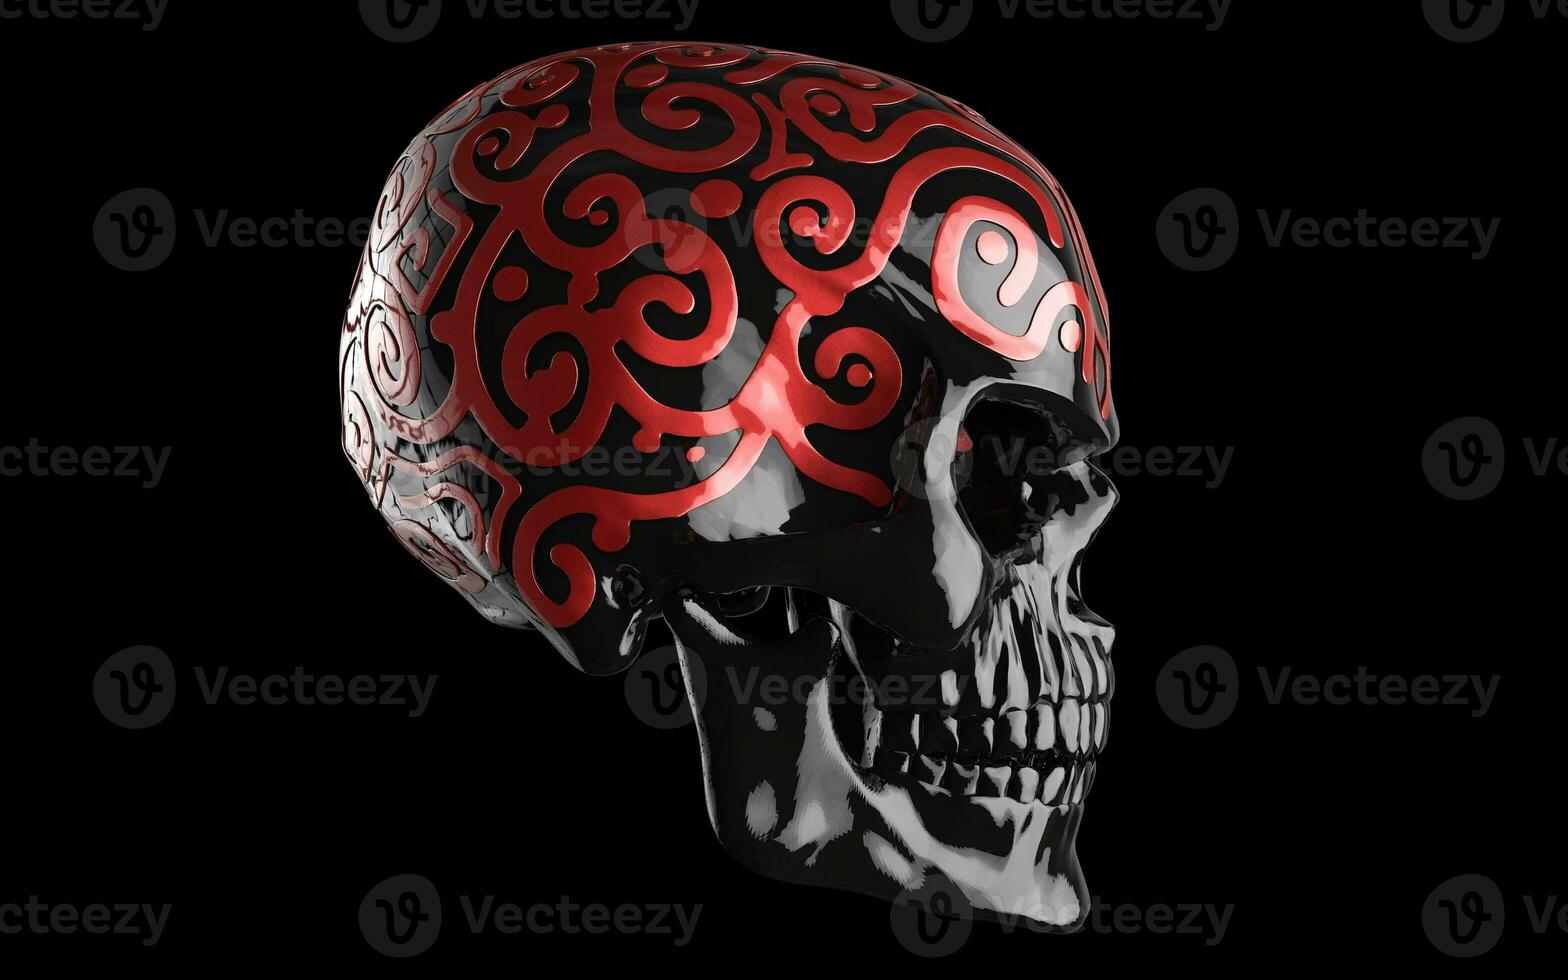 Black shiny skull with red ornamental details - side view photo